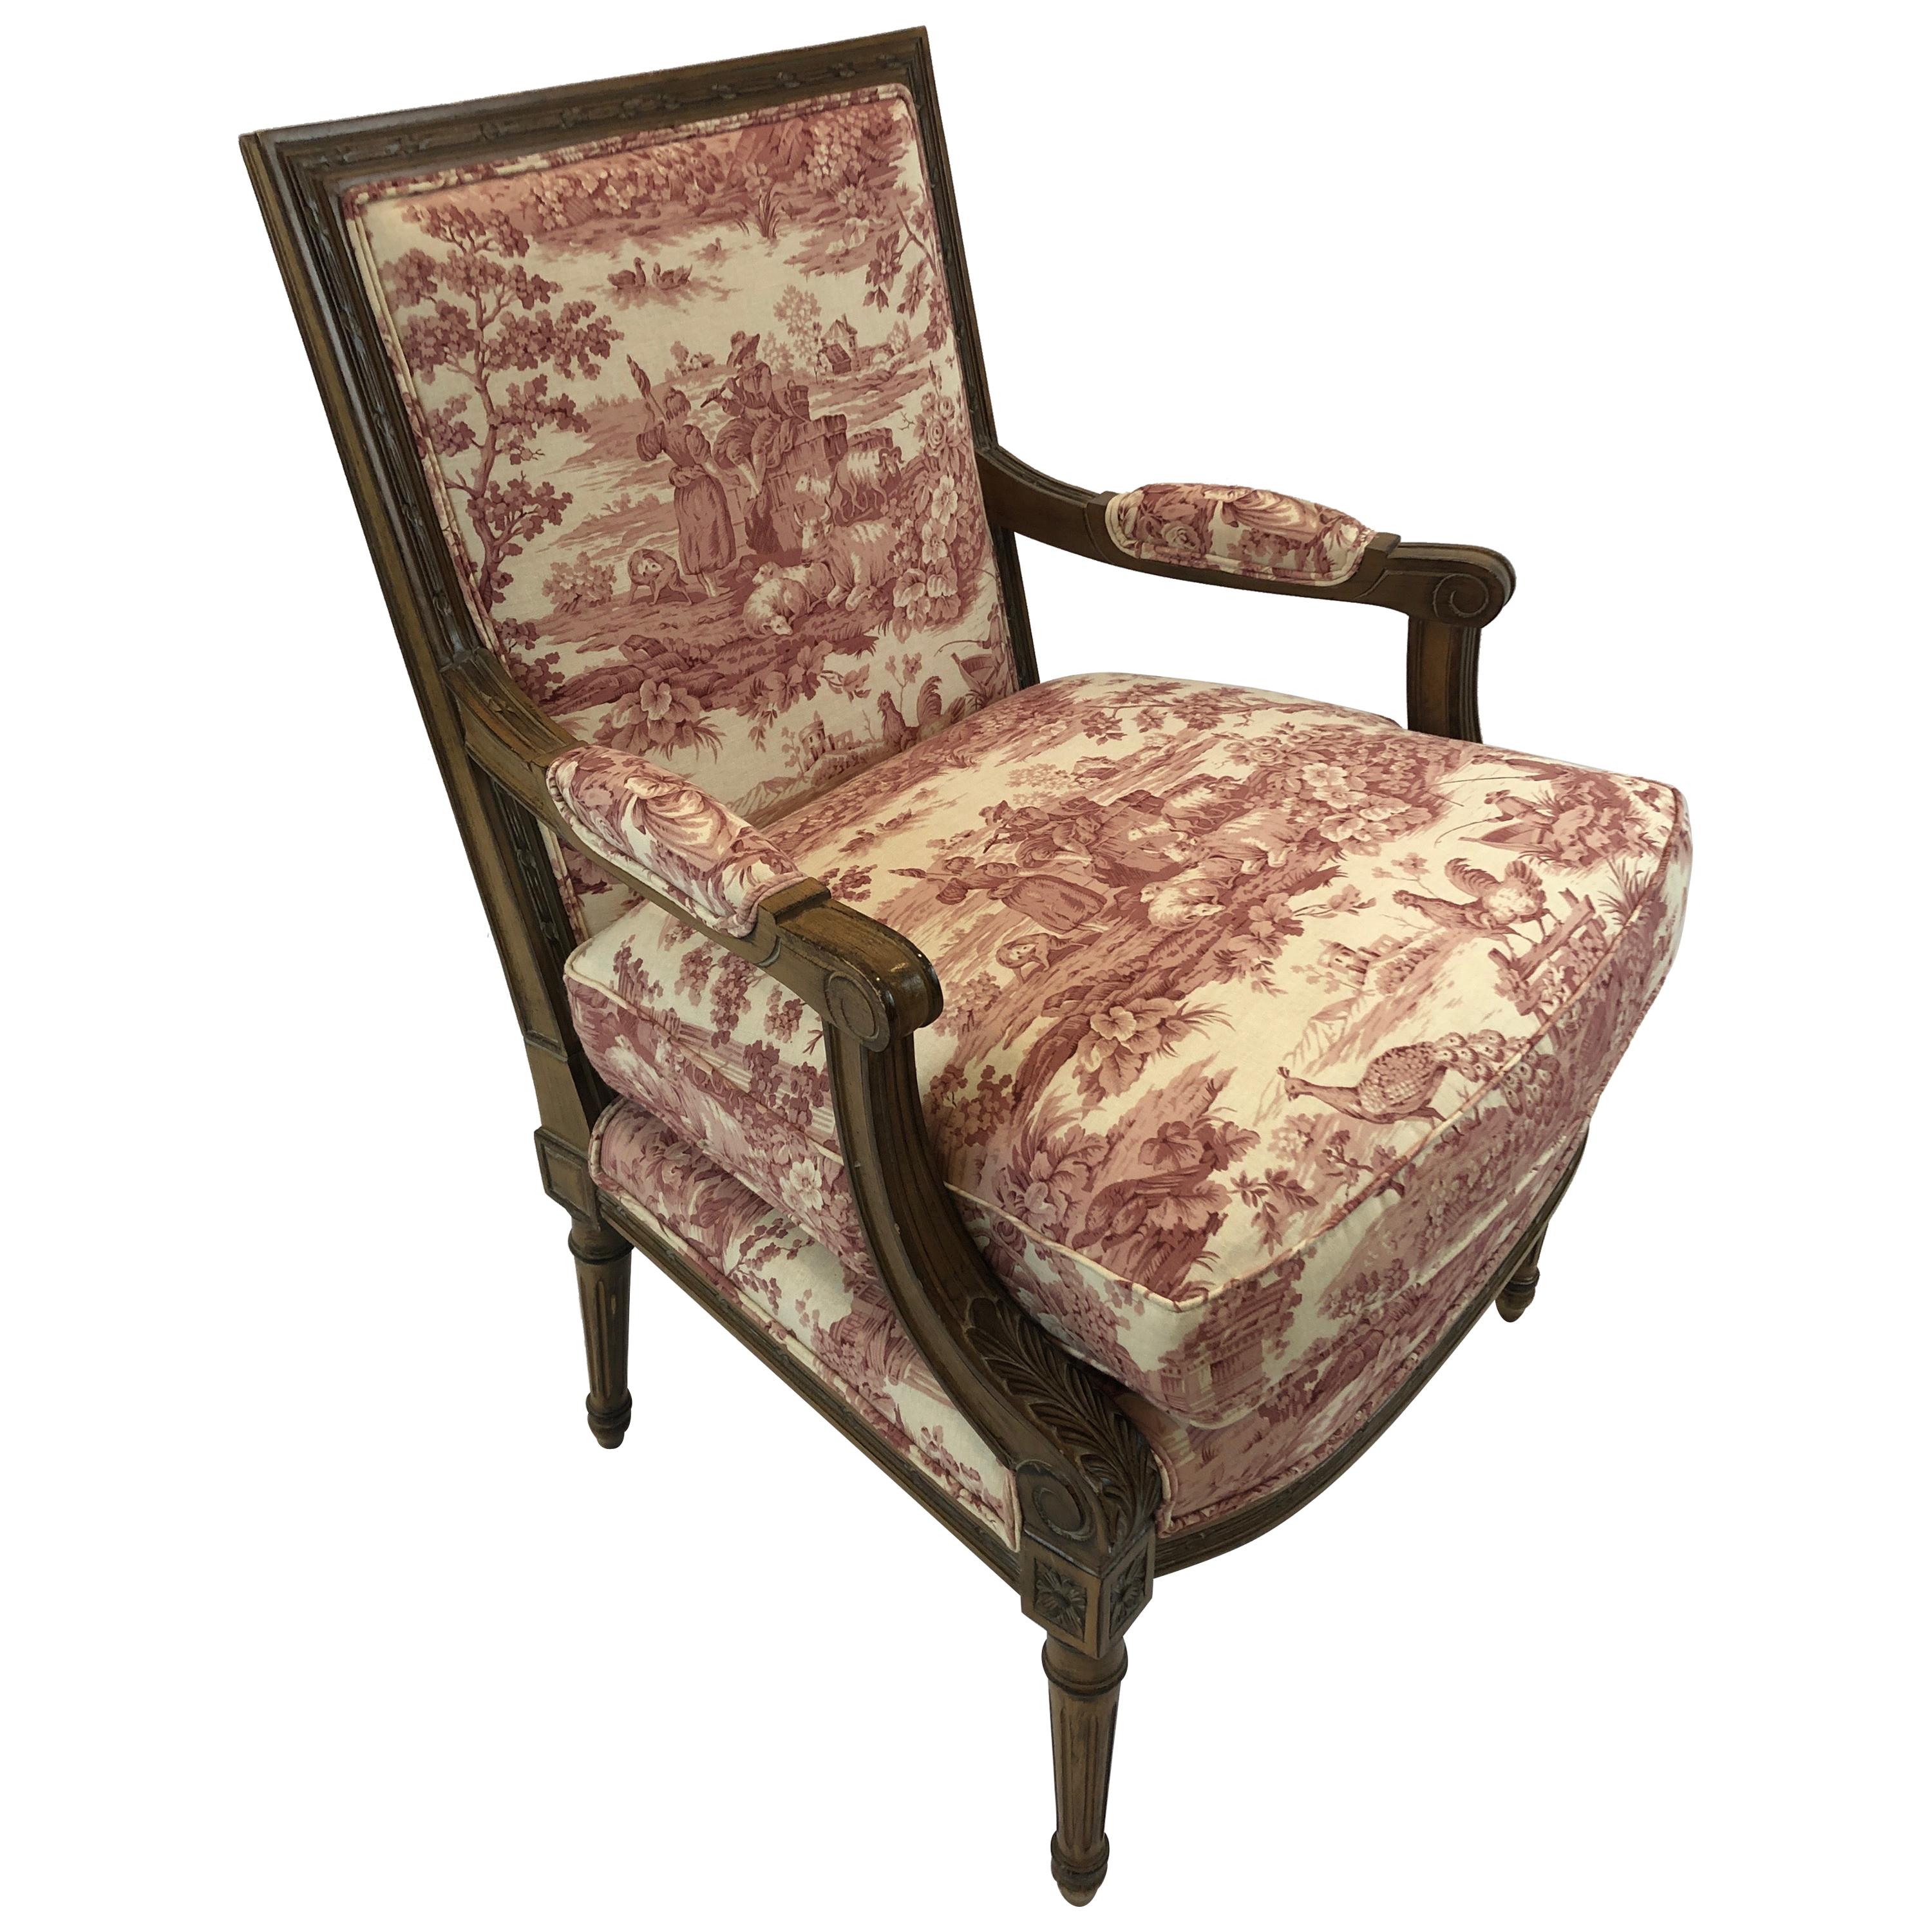 Regal Provencal Carved Fruitwood and Toile Upholstered Armchair